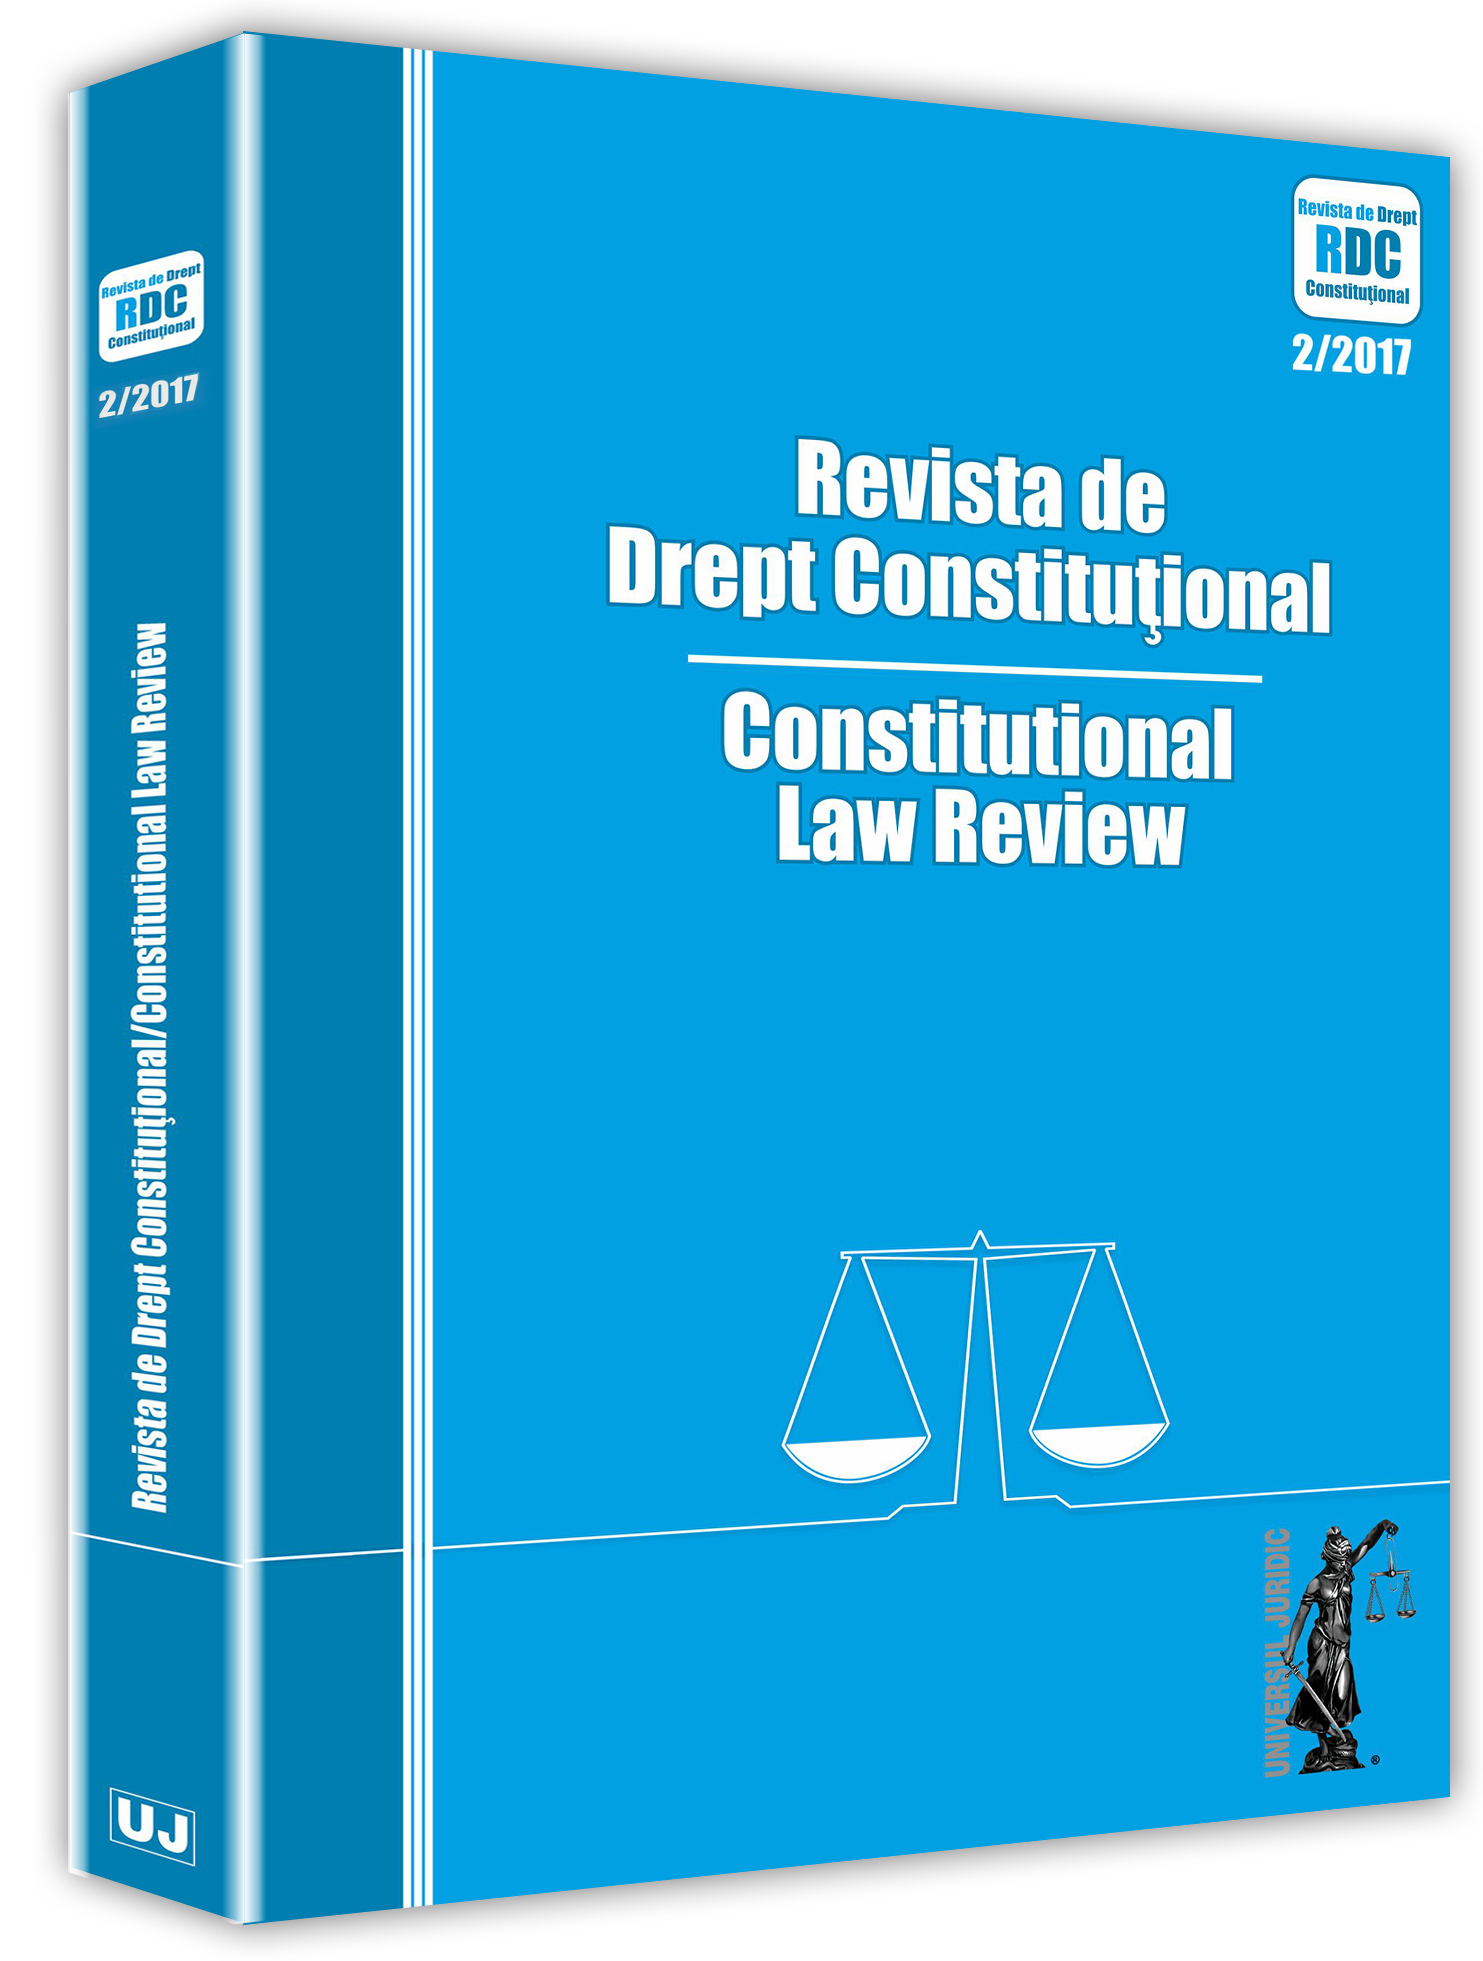 Unconstitutional legislative solutions enshrined by the Civil Procedure Code Cover Image